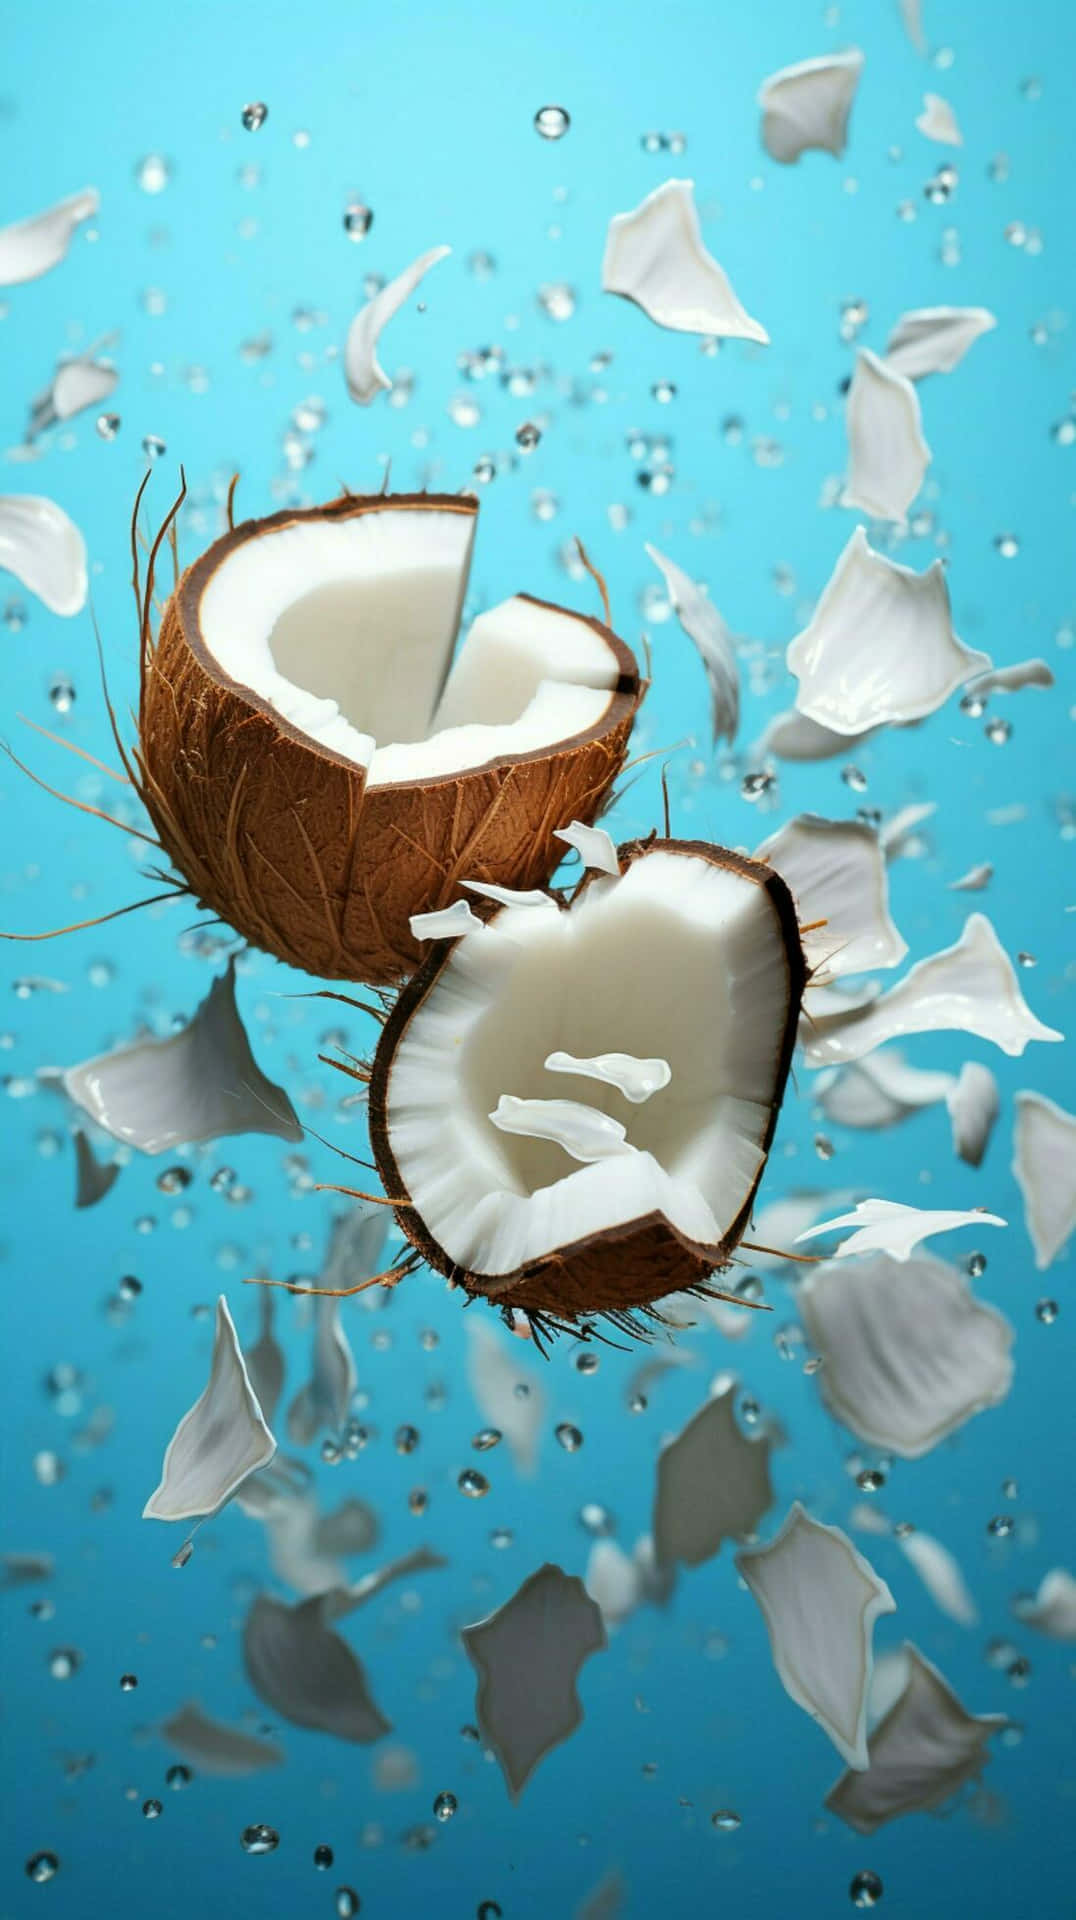 Floating Coconut Halveswith Water Droplets Wallpaper